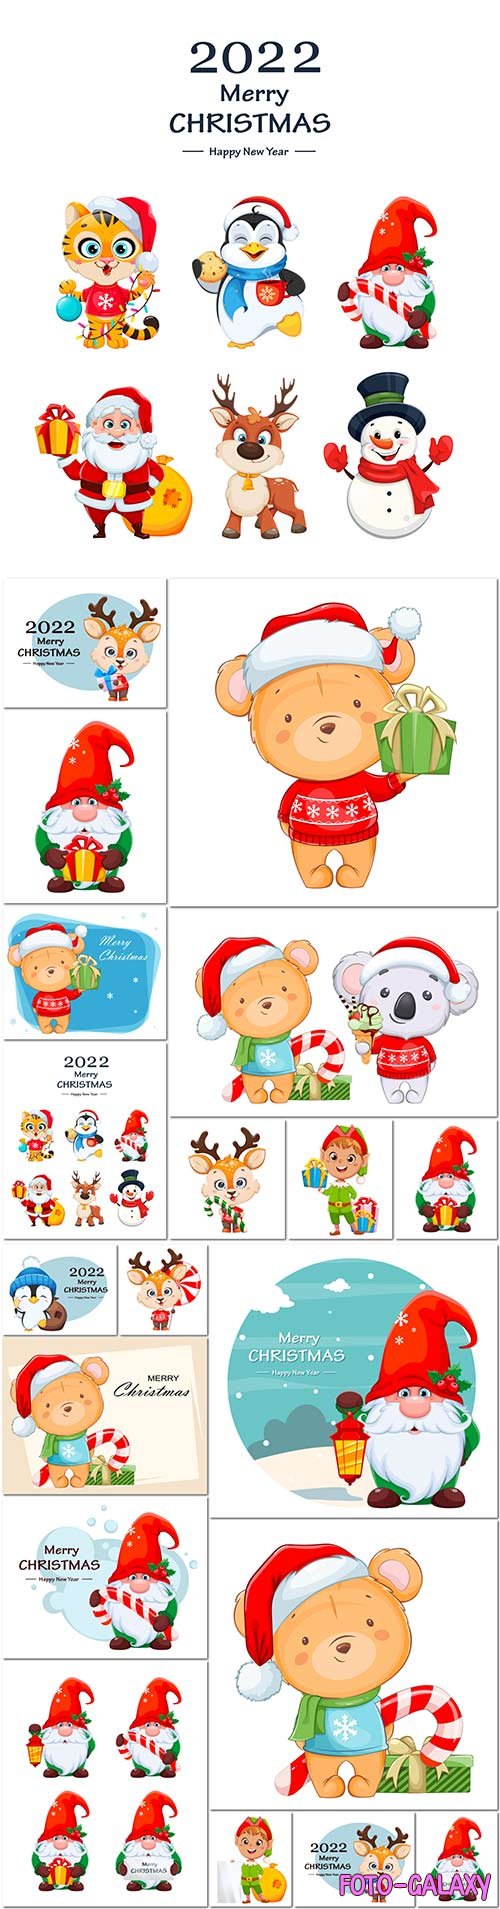 Funny gnome, animals, merry christmas and happy new year vector